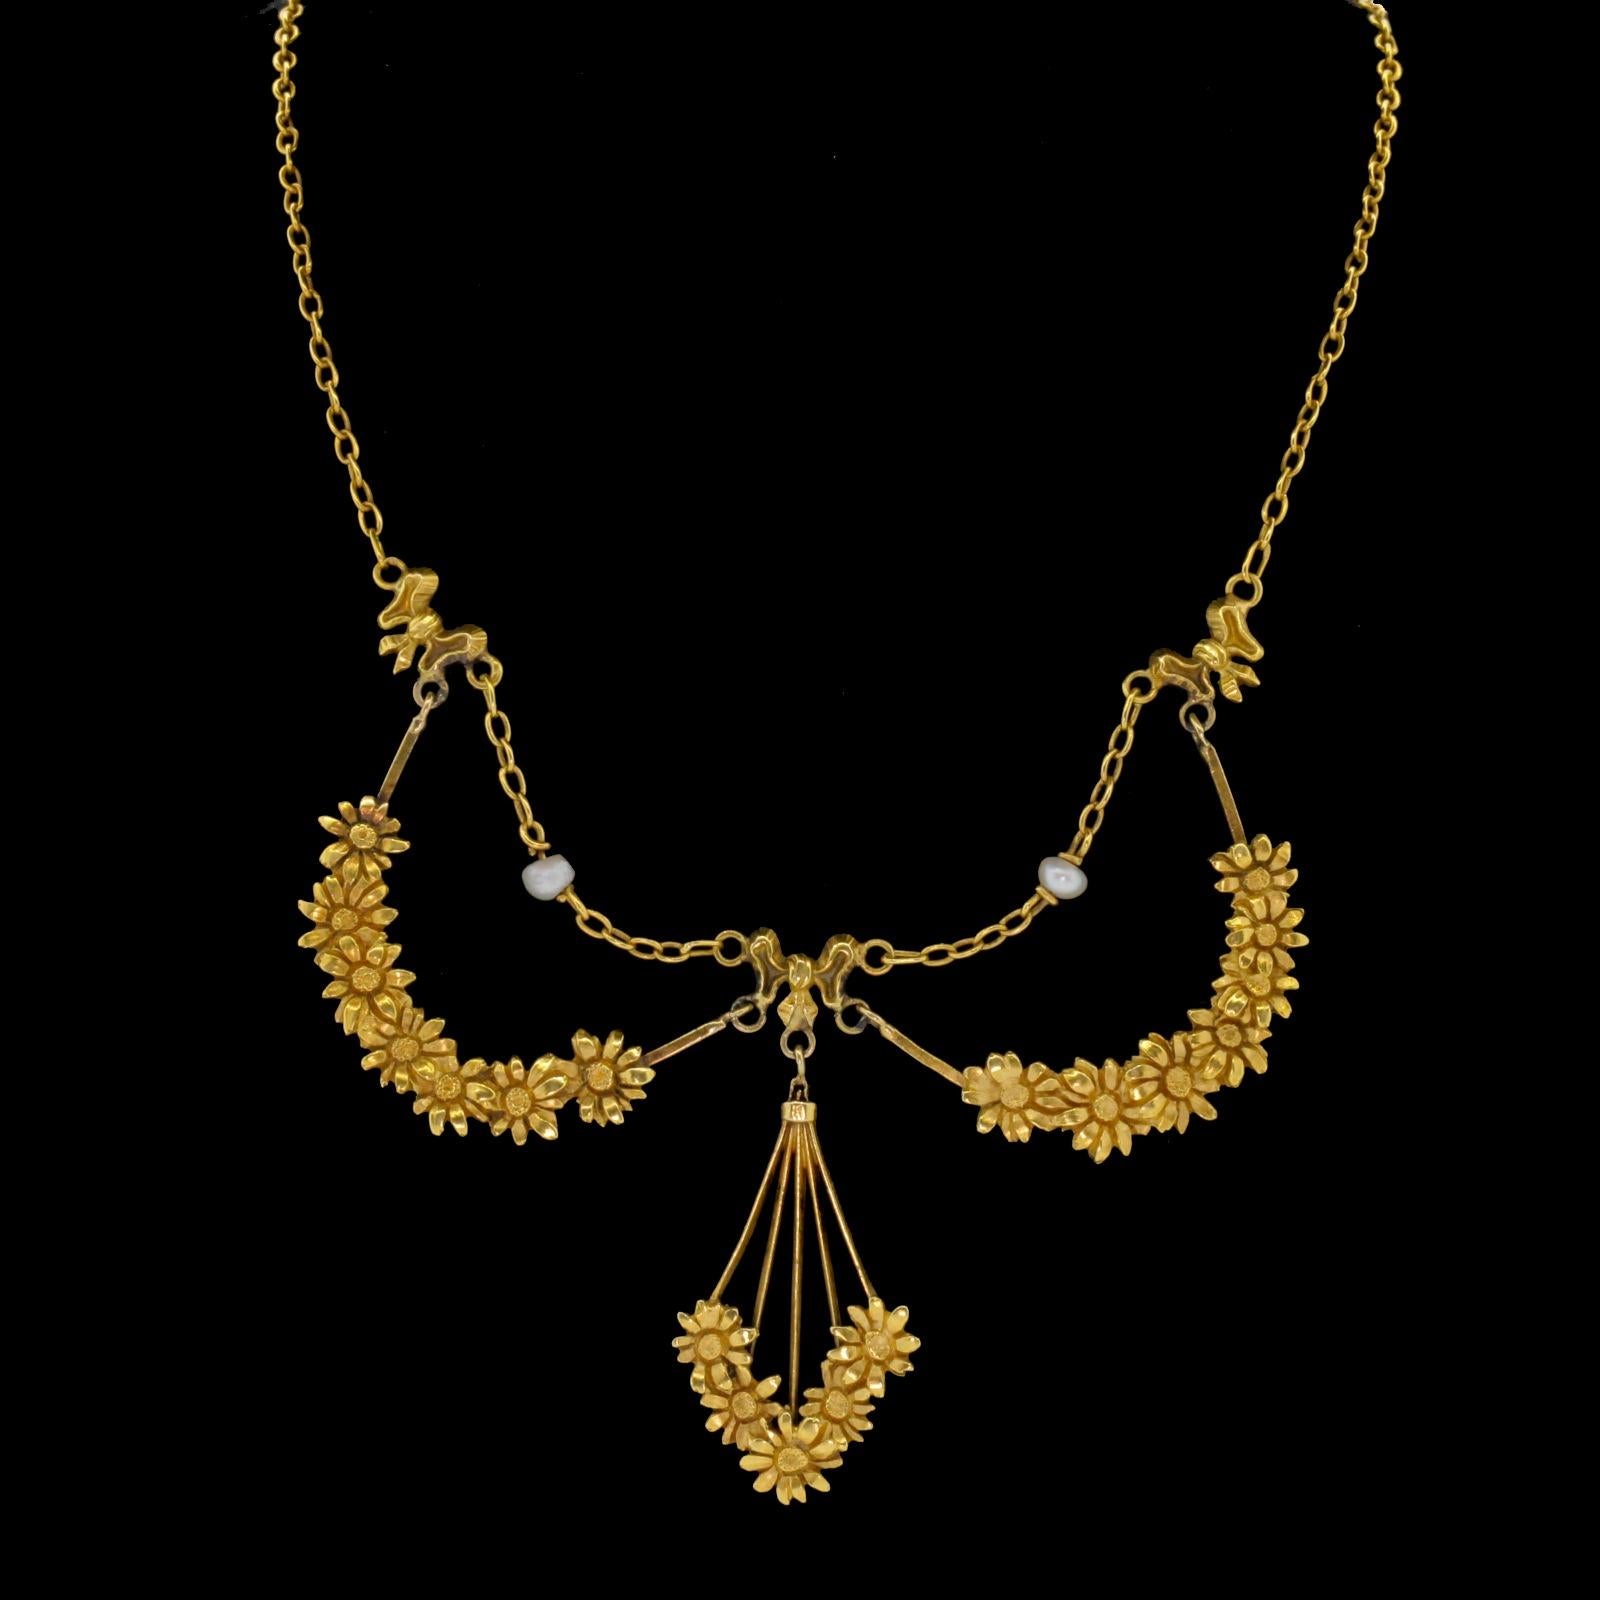 Beautiful coveted French Art Nouveau gold necklace.  This pristine piece is designed with two garlands of daisies and a dangling bouquet that are suspended by ribbons and chain.  The necklace is delicately accented with two round natural Pearls 